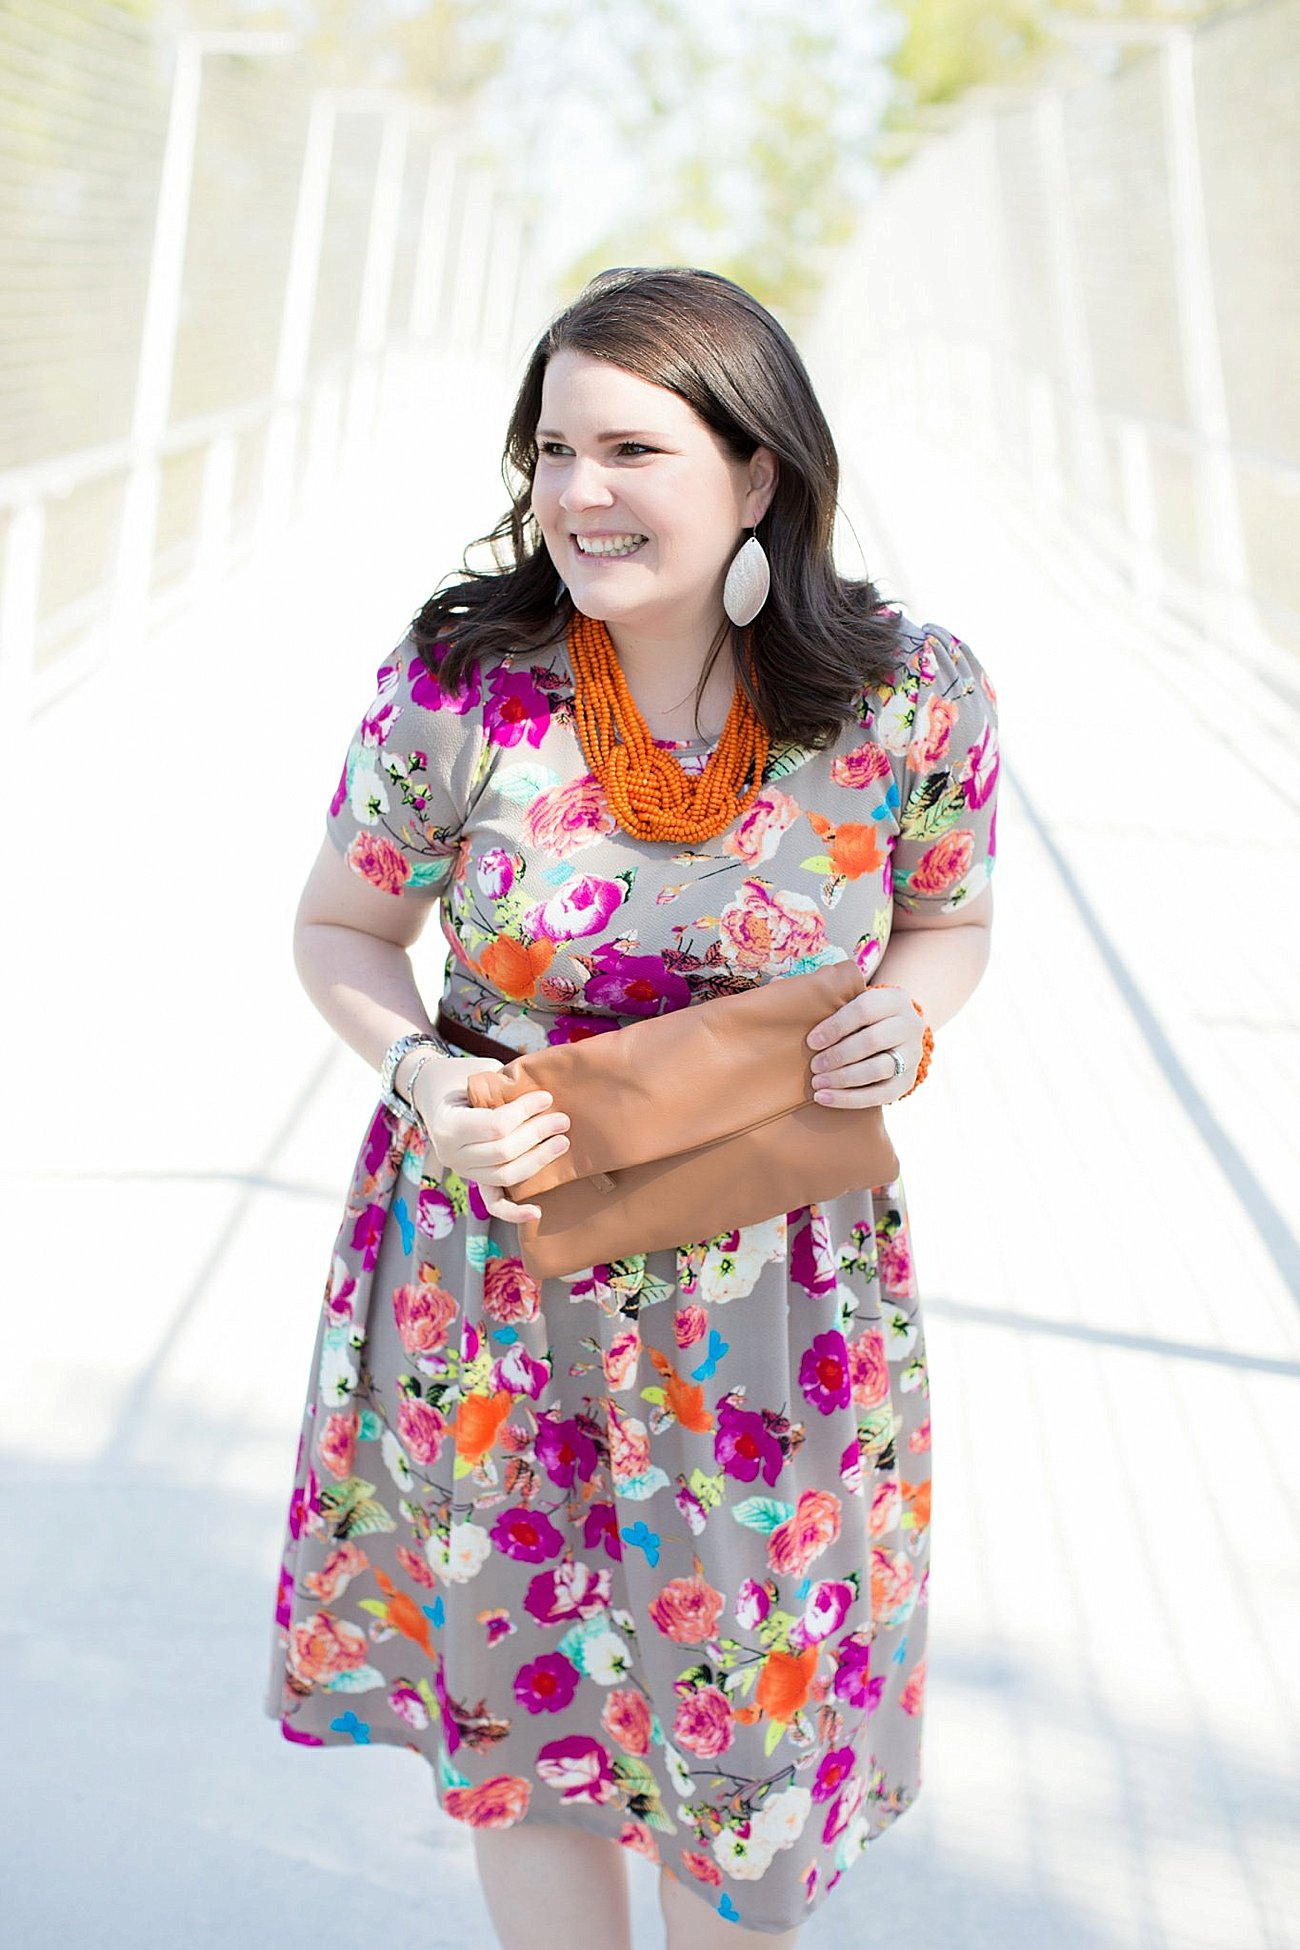 LulaRoe Floral Amelia Dress, The Root Collective Millie Smoking Shoe, Made for Freedom Lily Necklace and Bracelet, Sseko Designs Leather Clutch, Nickel and Suede earrings | Mom Style | North Carolina Fashion & Style Blogger (6)